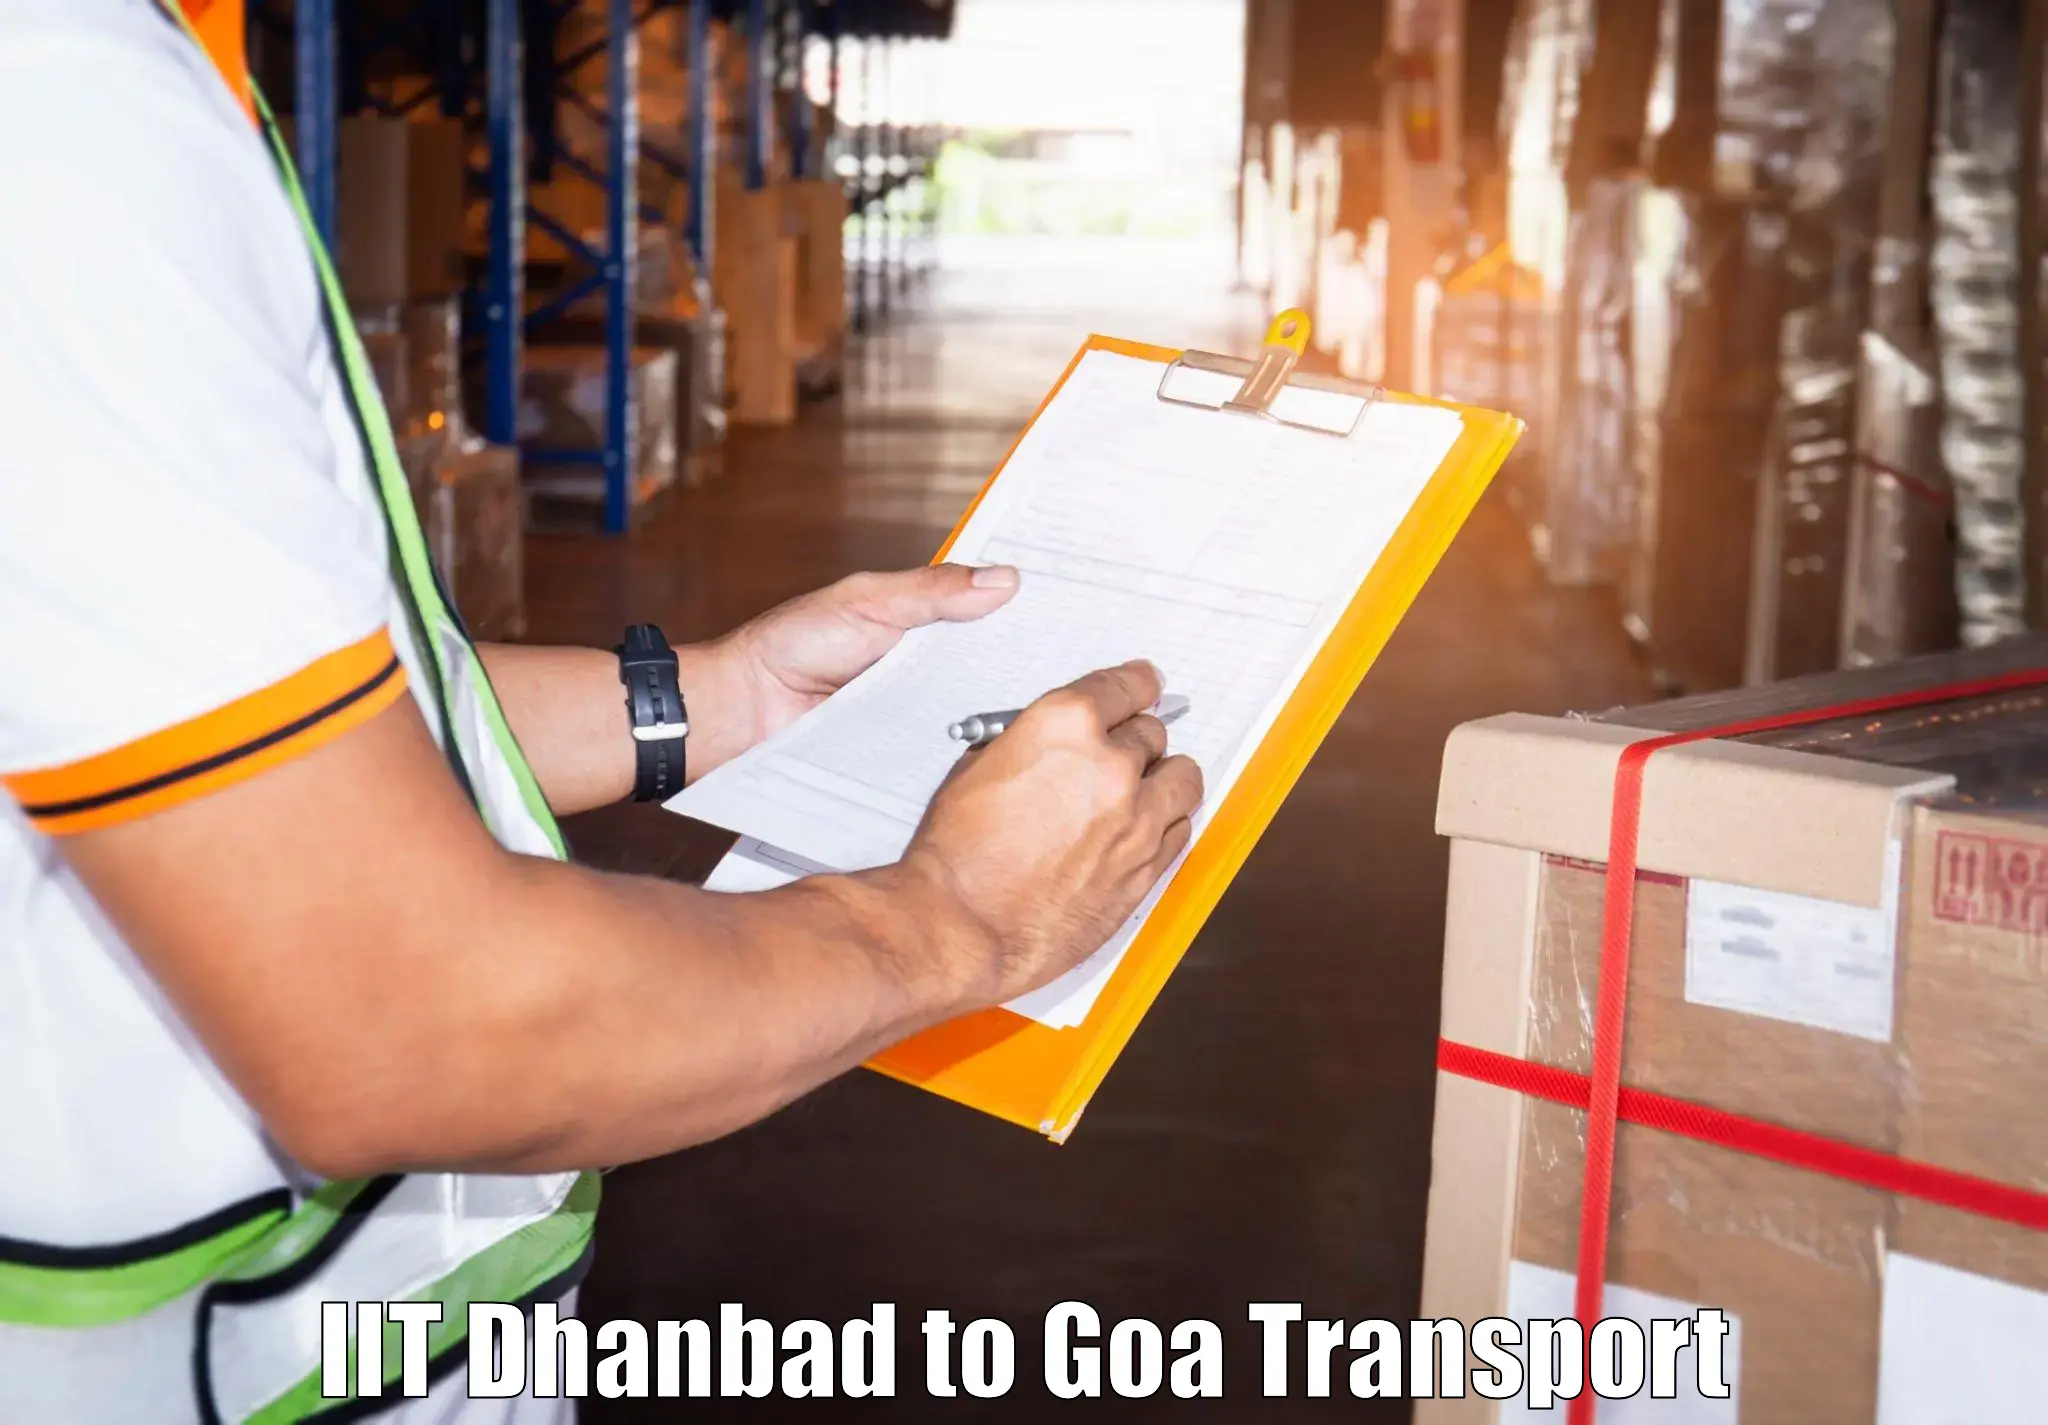 Nationwide transport services IIT Dhanbad to Goa